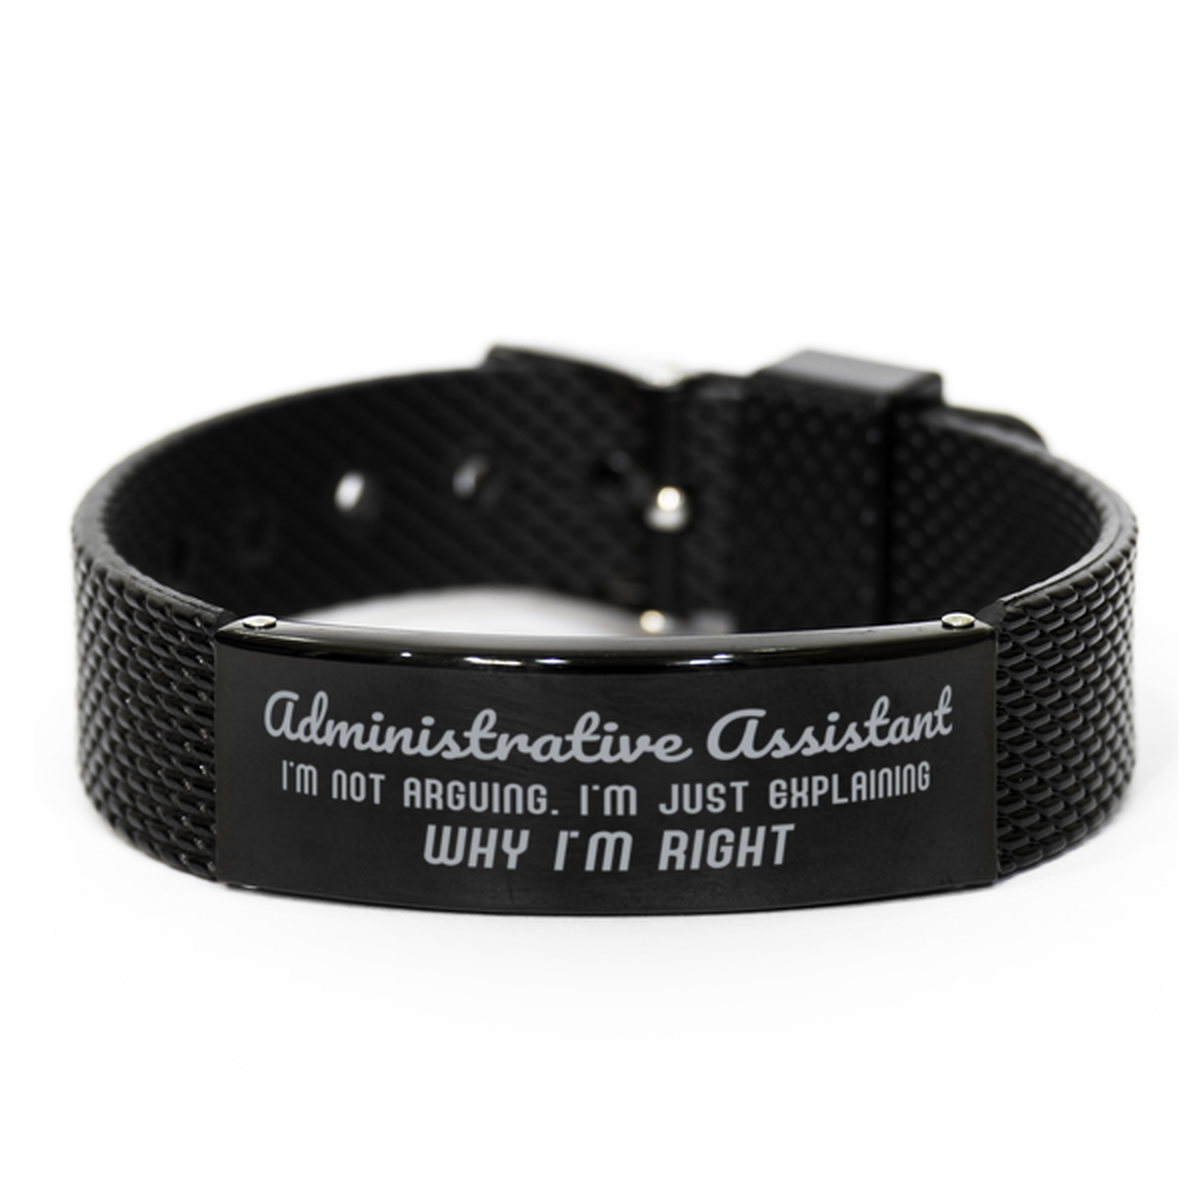 Administrative Assistant I'm not Arguing. I'm Just Explaining Why I'm RIGHT Black Shark Mesh Bracelet, Funny Saying Quote Administrative Assistant Gifts For Administrative Assistant Graduation Birthday Christmas Gifts for Men Women Coworker